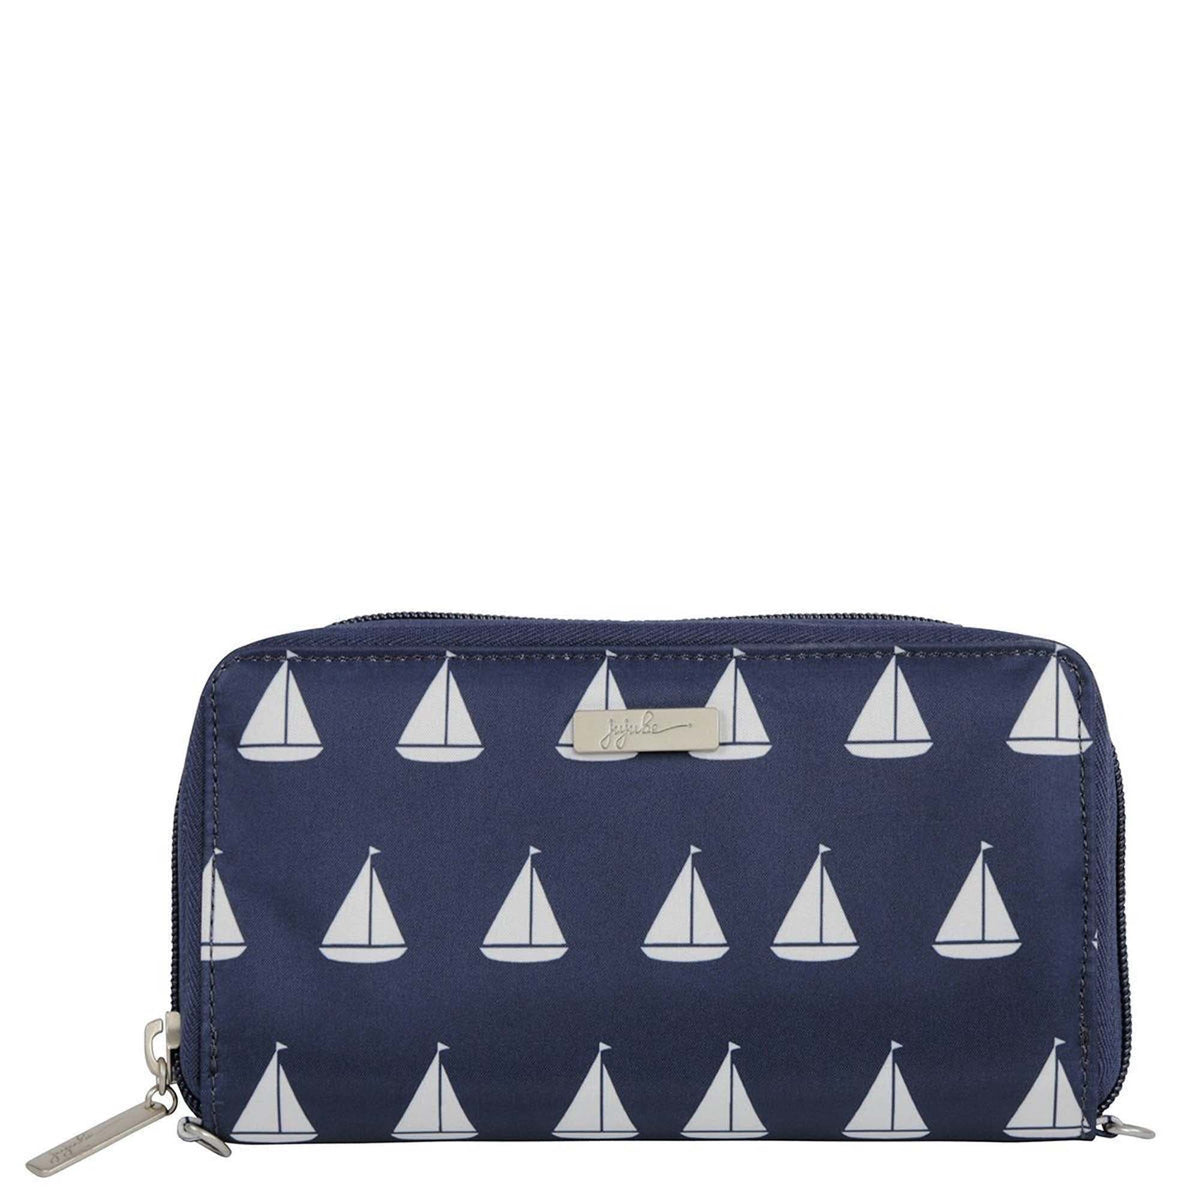 Ju-Ju-Be The Coastal Collection Be Spendy Clutch Wallet